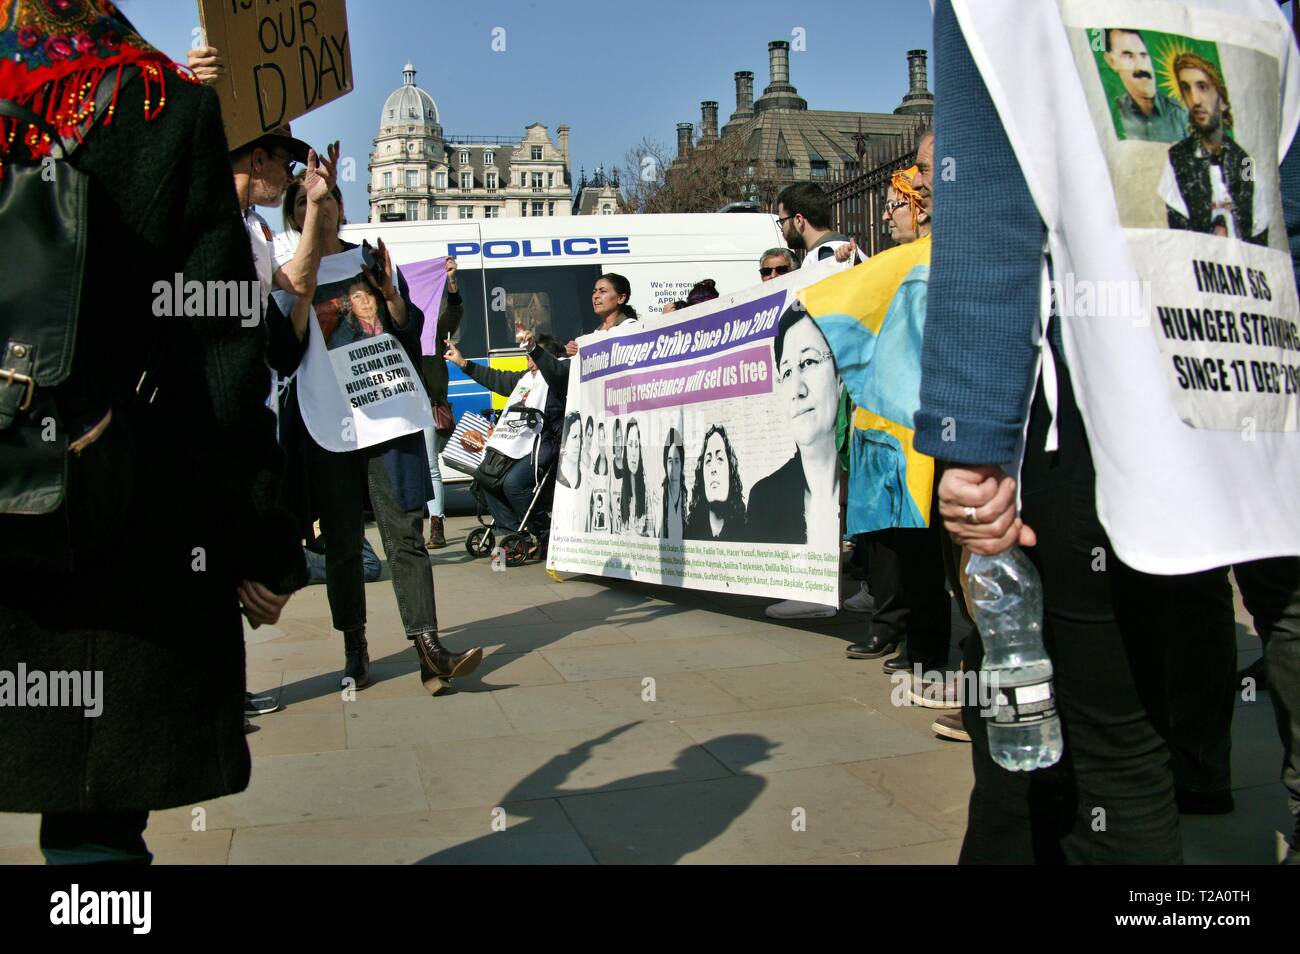 LONDON, UNITED KINGDOM. 29th March 2019, Protesters outside the Houses of Parliament, Westminster to highlight the plight of Turkish Political Prisoner Leyla Guven who is currently on hunger strike in Turkey. © Martin Foskett/Knelstrom Ltd/Alamy Live News Stock Photo